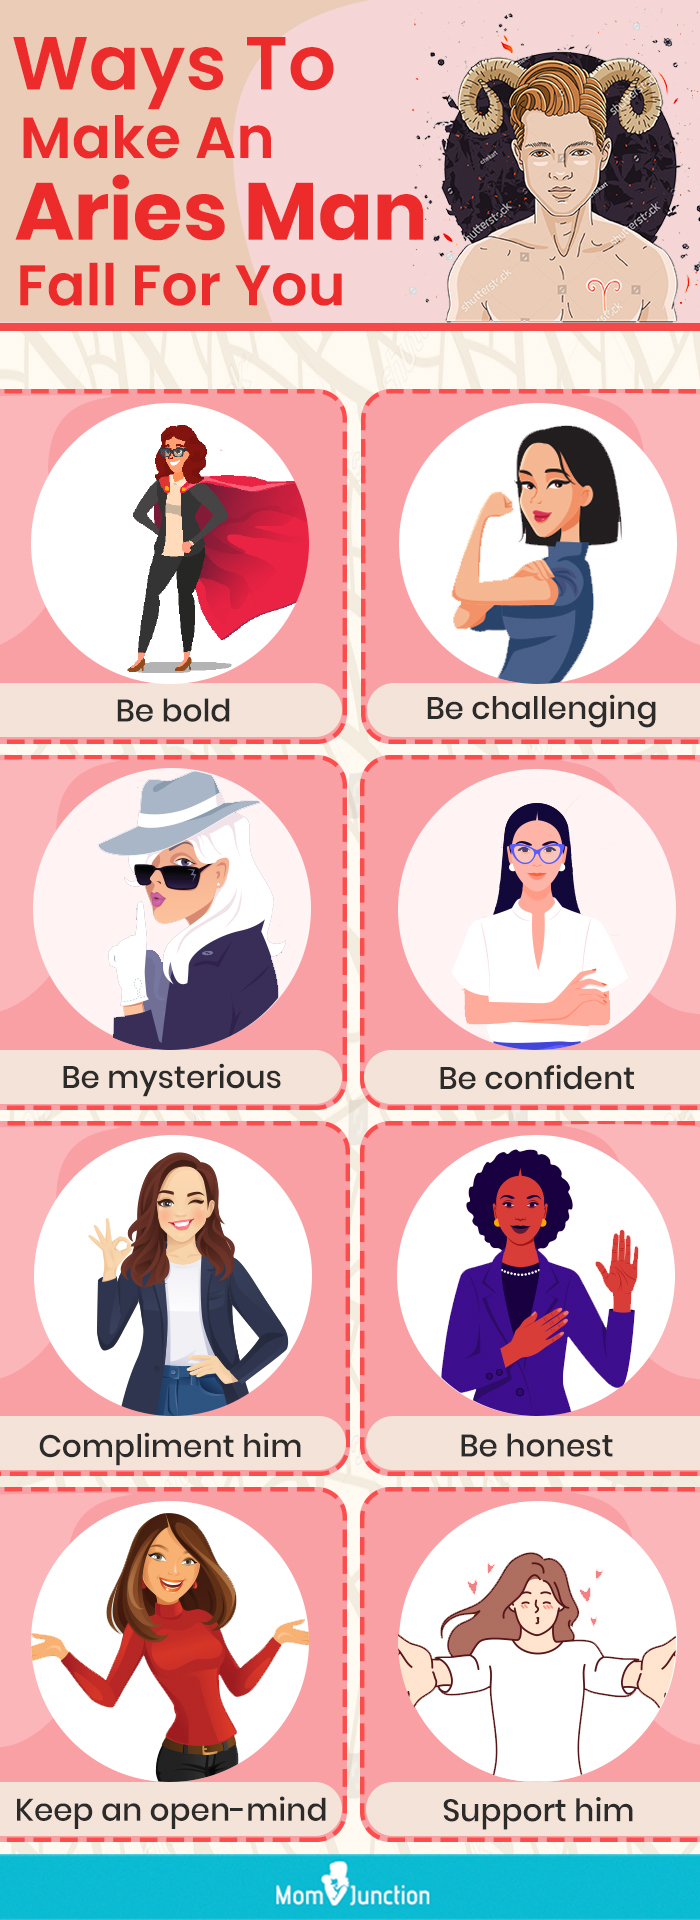 ways to attract an aries man (infographic)